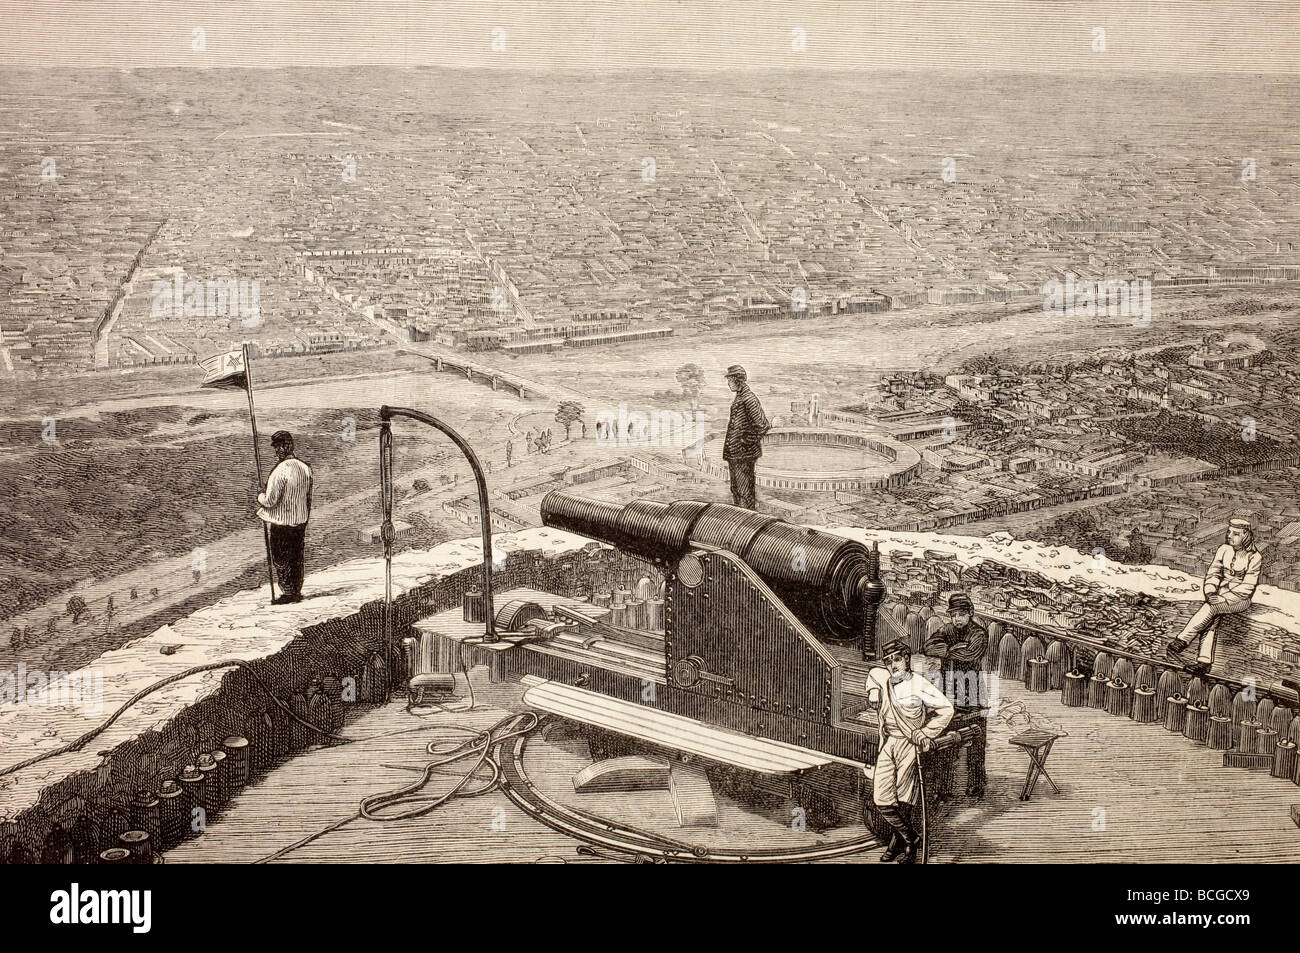 Overall view of Lima, Peru from San Cristobal fort circa 1880's. Stock Photo